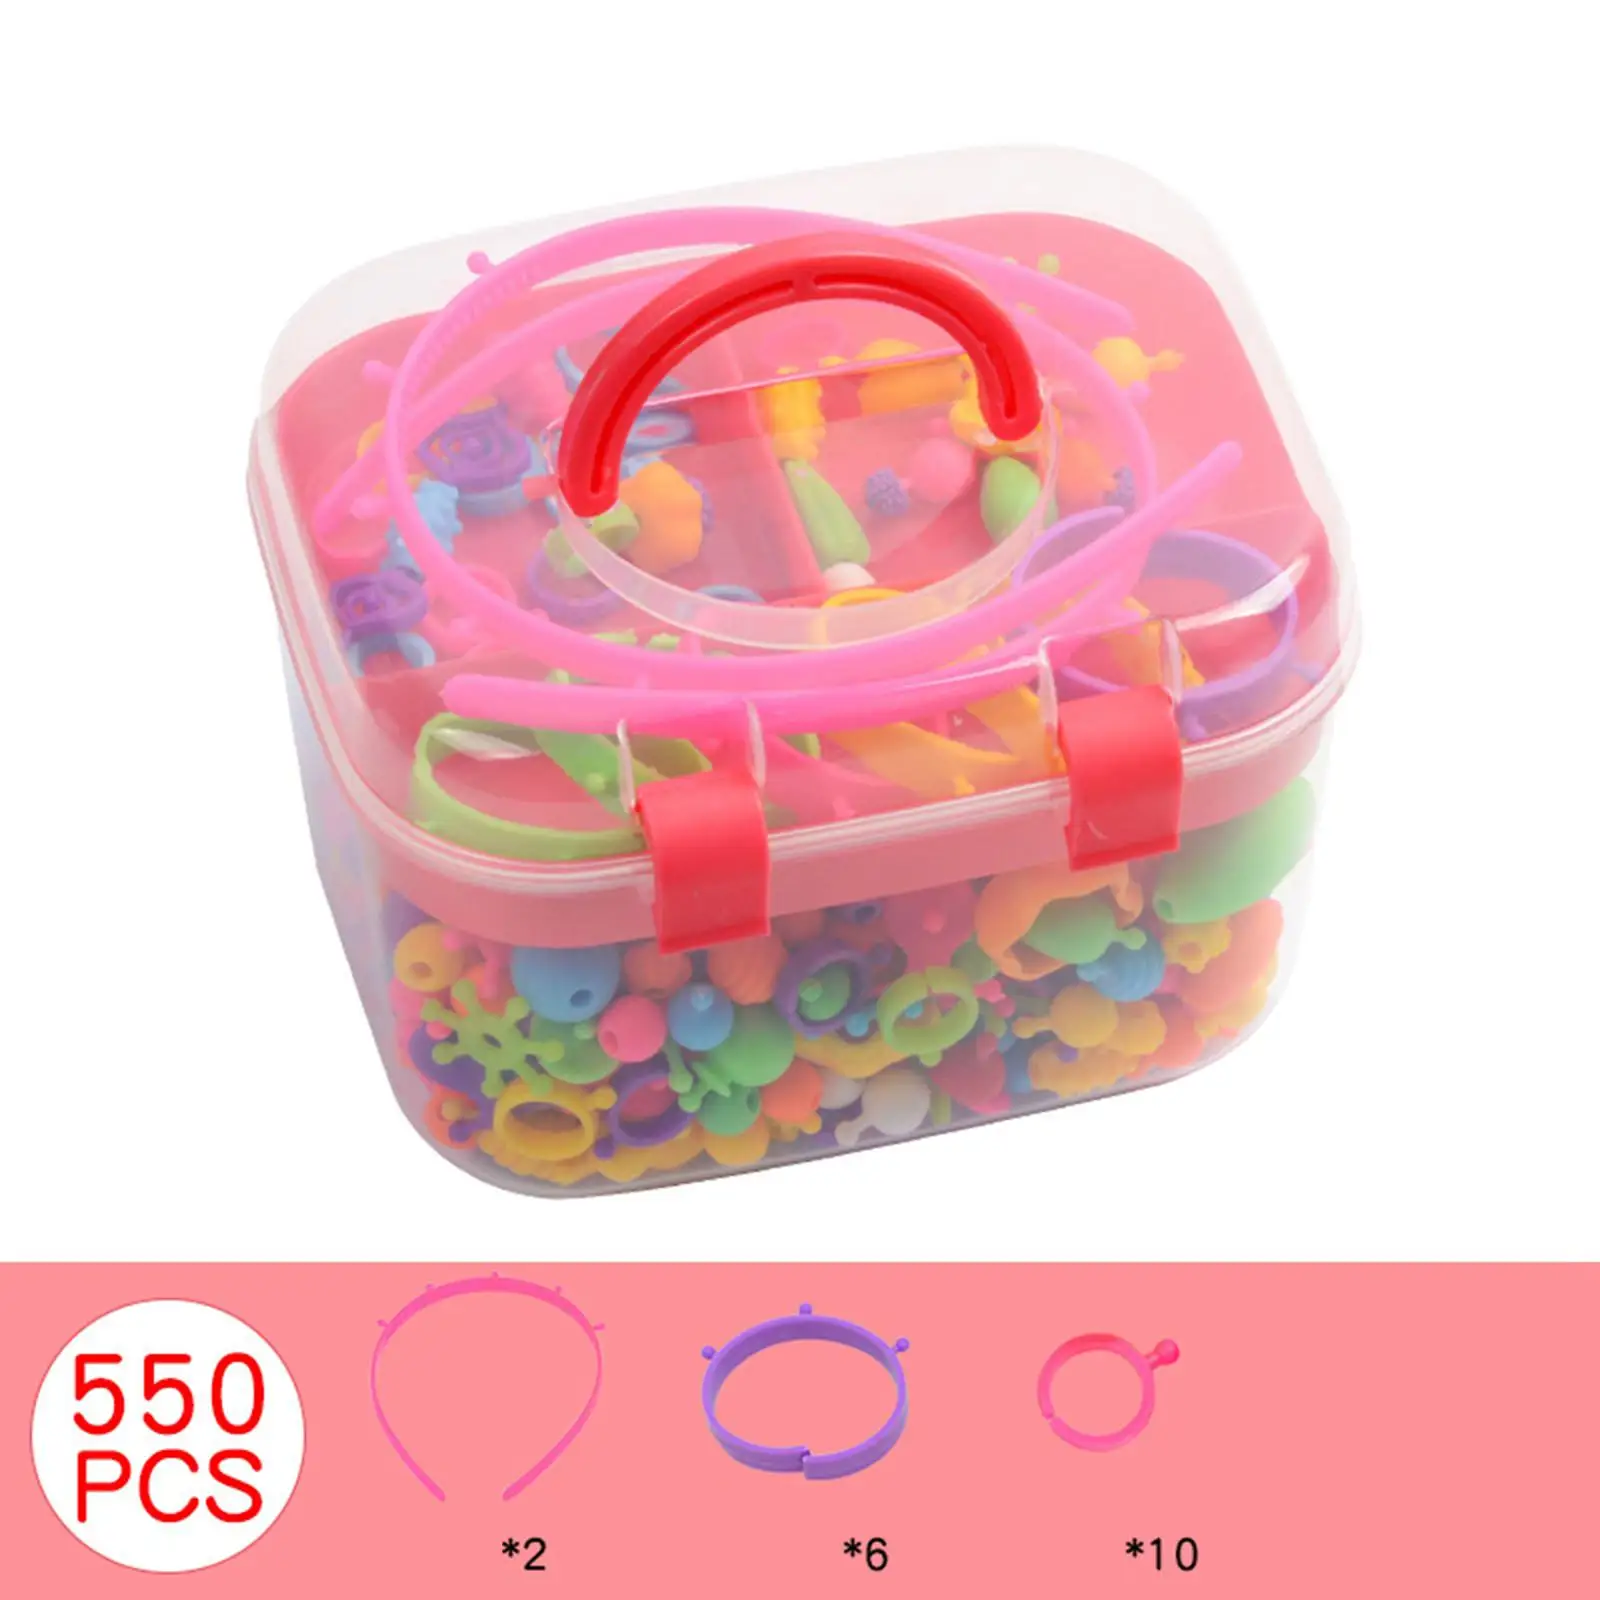 550pcs Pop Beads DIY Kids Jewelry Making Kit Jewelry Set Toys Arts Snap Together Beads for Earrings Bracelet Birthday Gift Girls